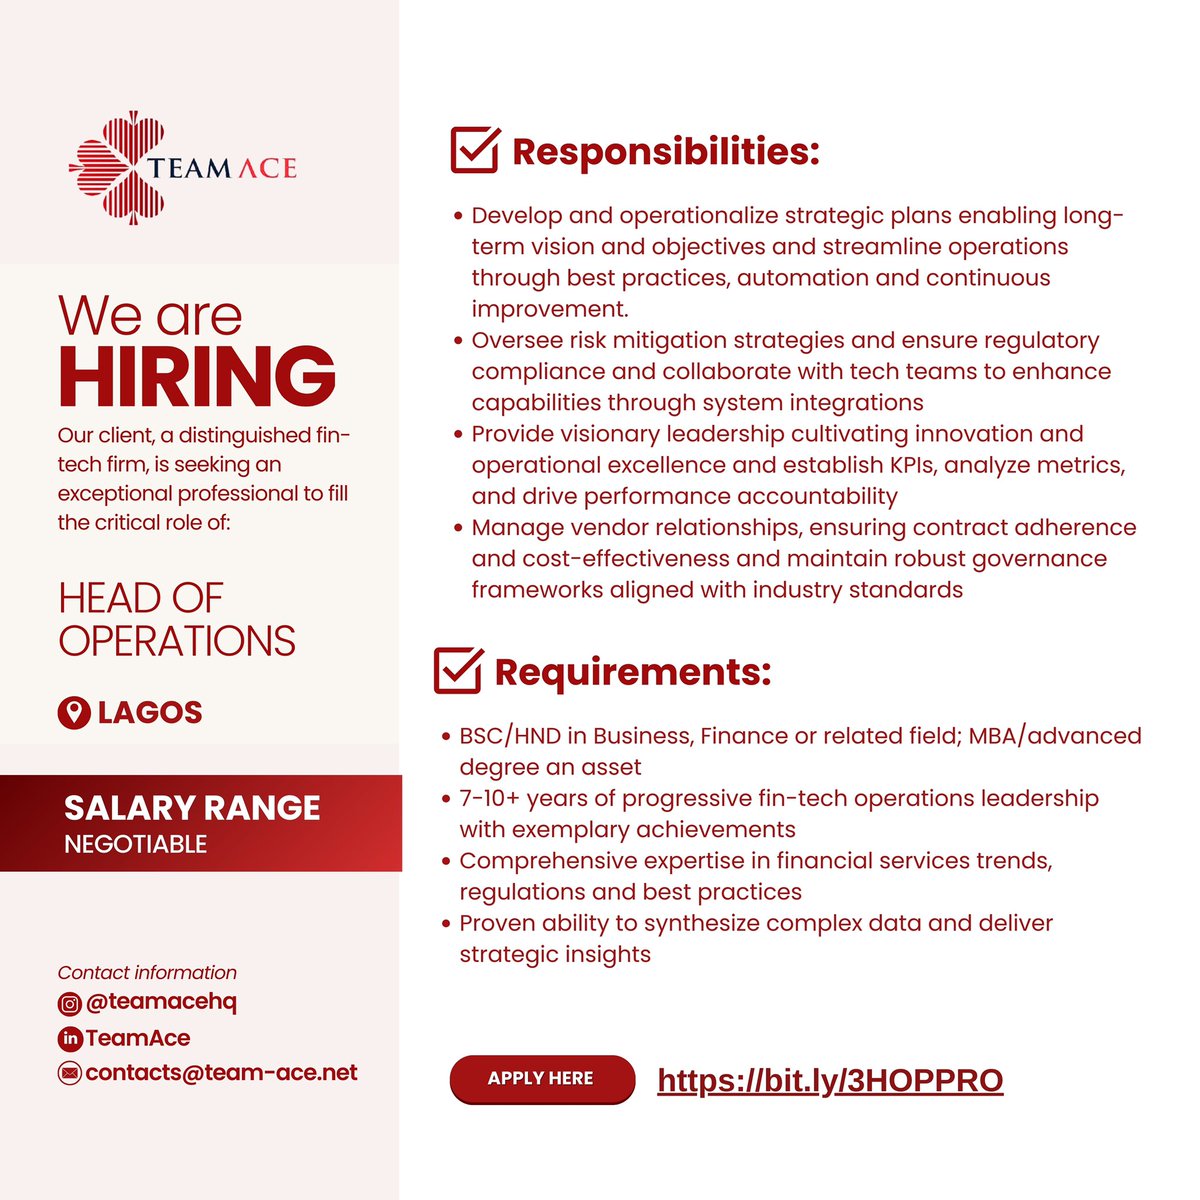 Job Opening!!!!

Qualified and Interested? Apply here👇
bit.ly/3HOPPRO

#operationsmanager #jobopportunity #hringnow #BBNaija #employmentopportunities #employment #vacancy #teamace